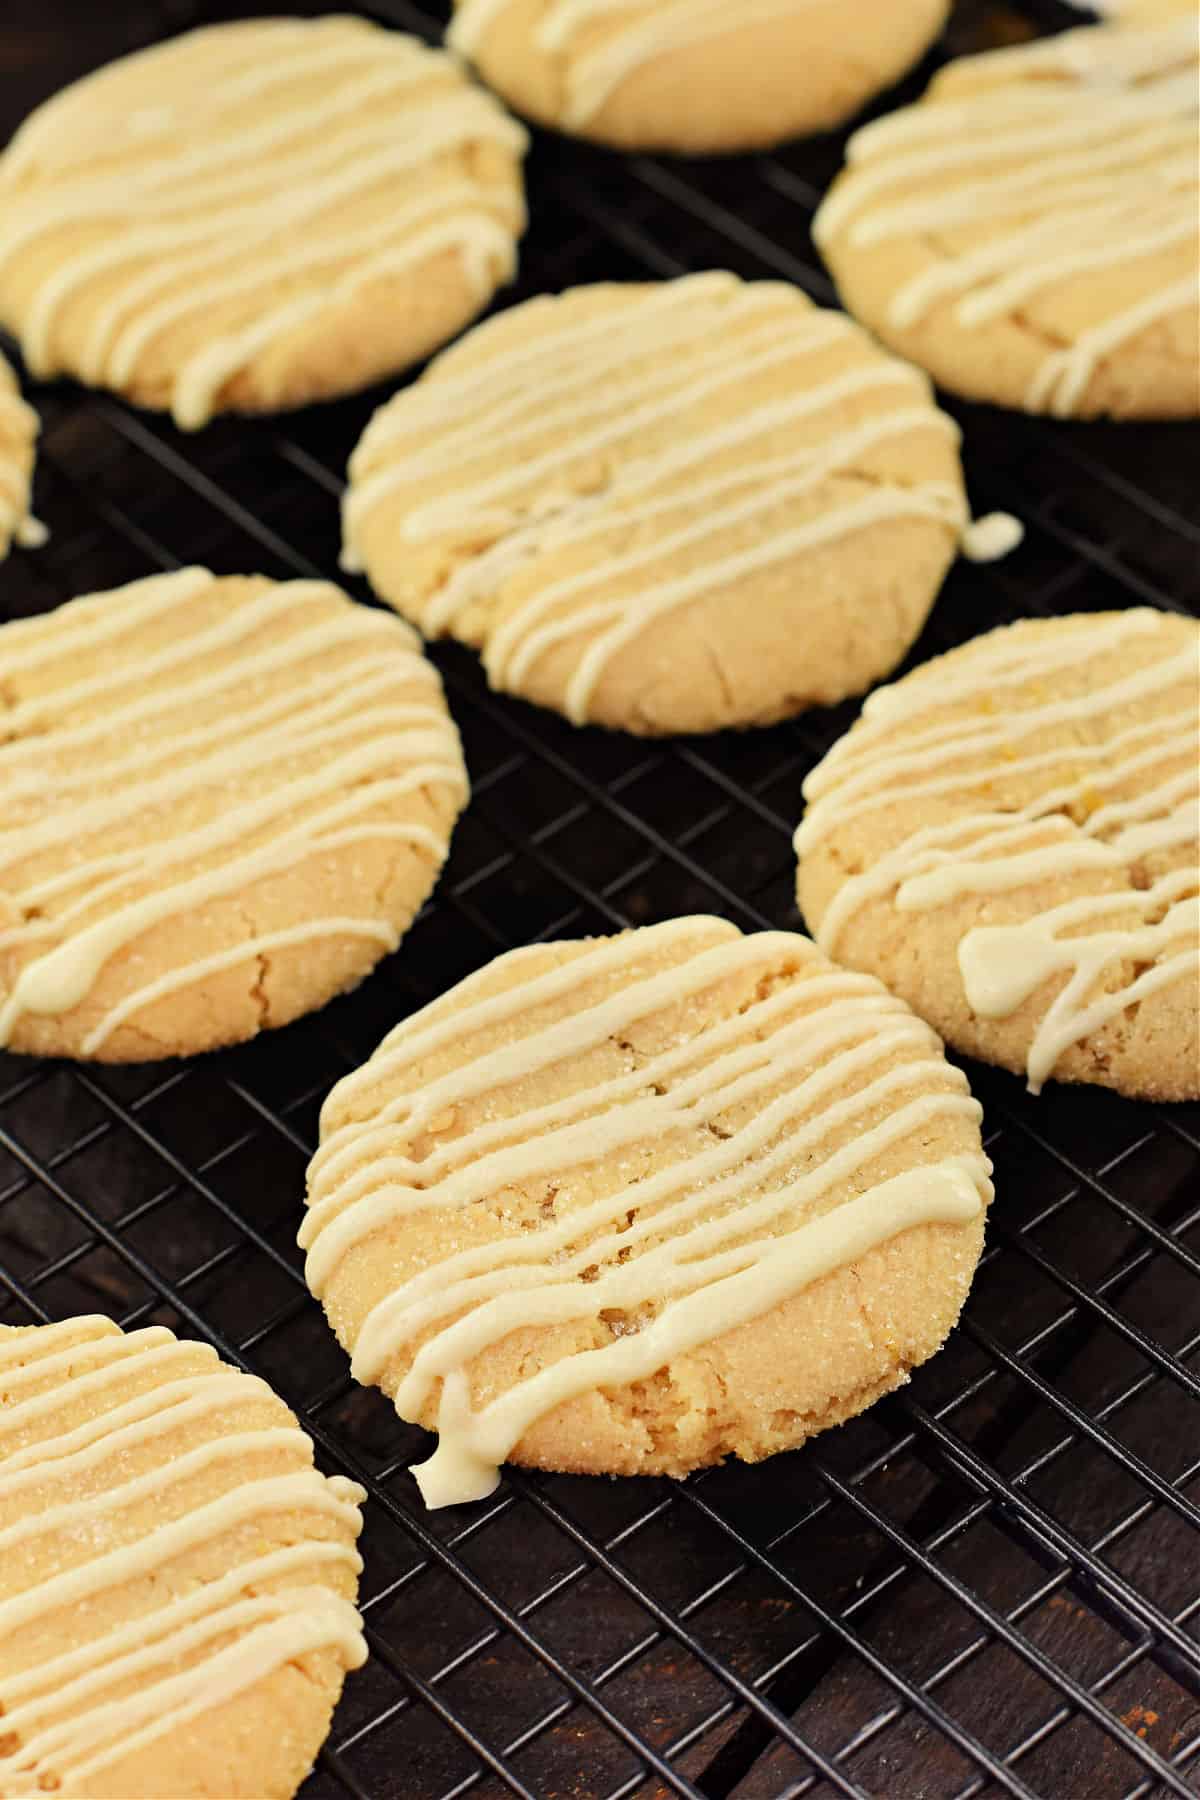 Lemon cookies with white chocolate drizzled on top on a wire cooling rack.